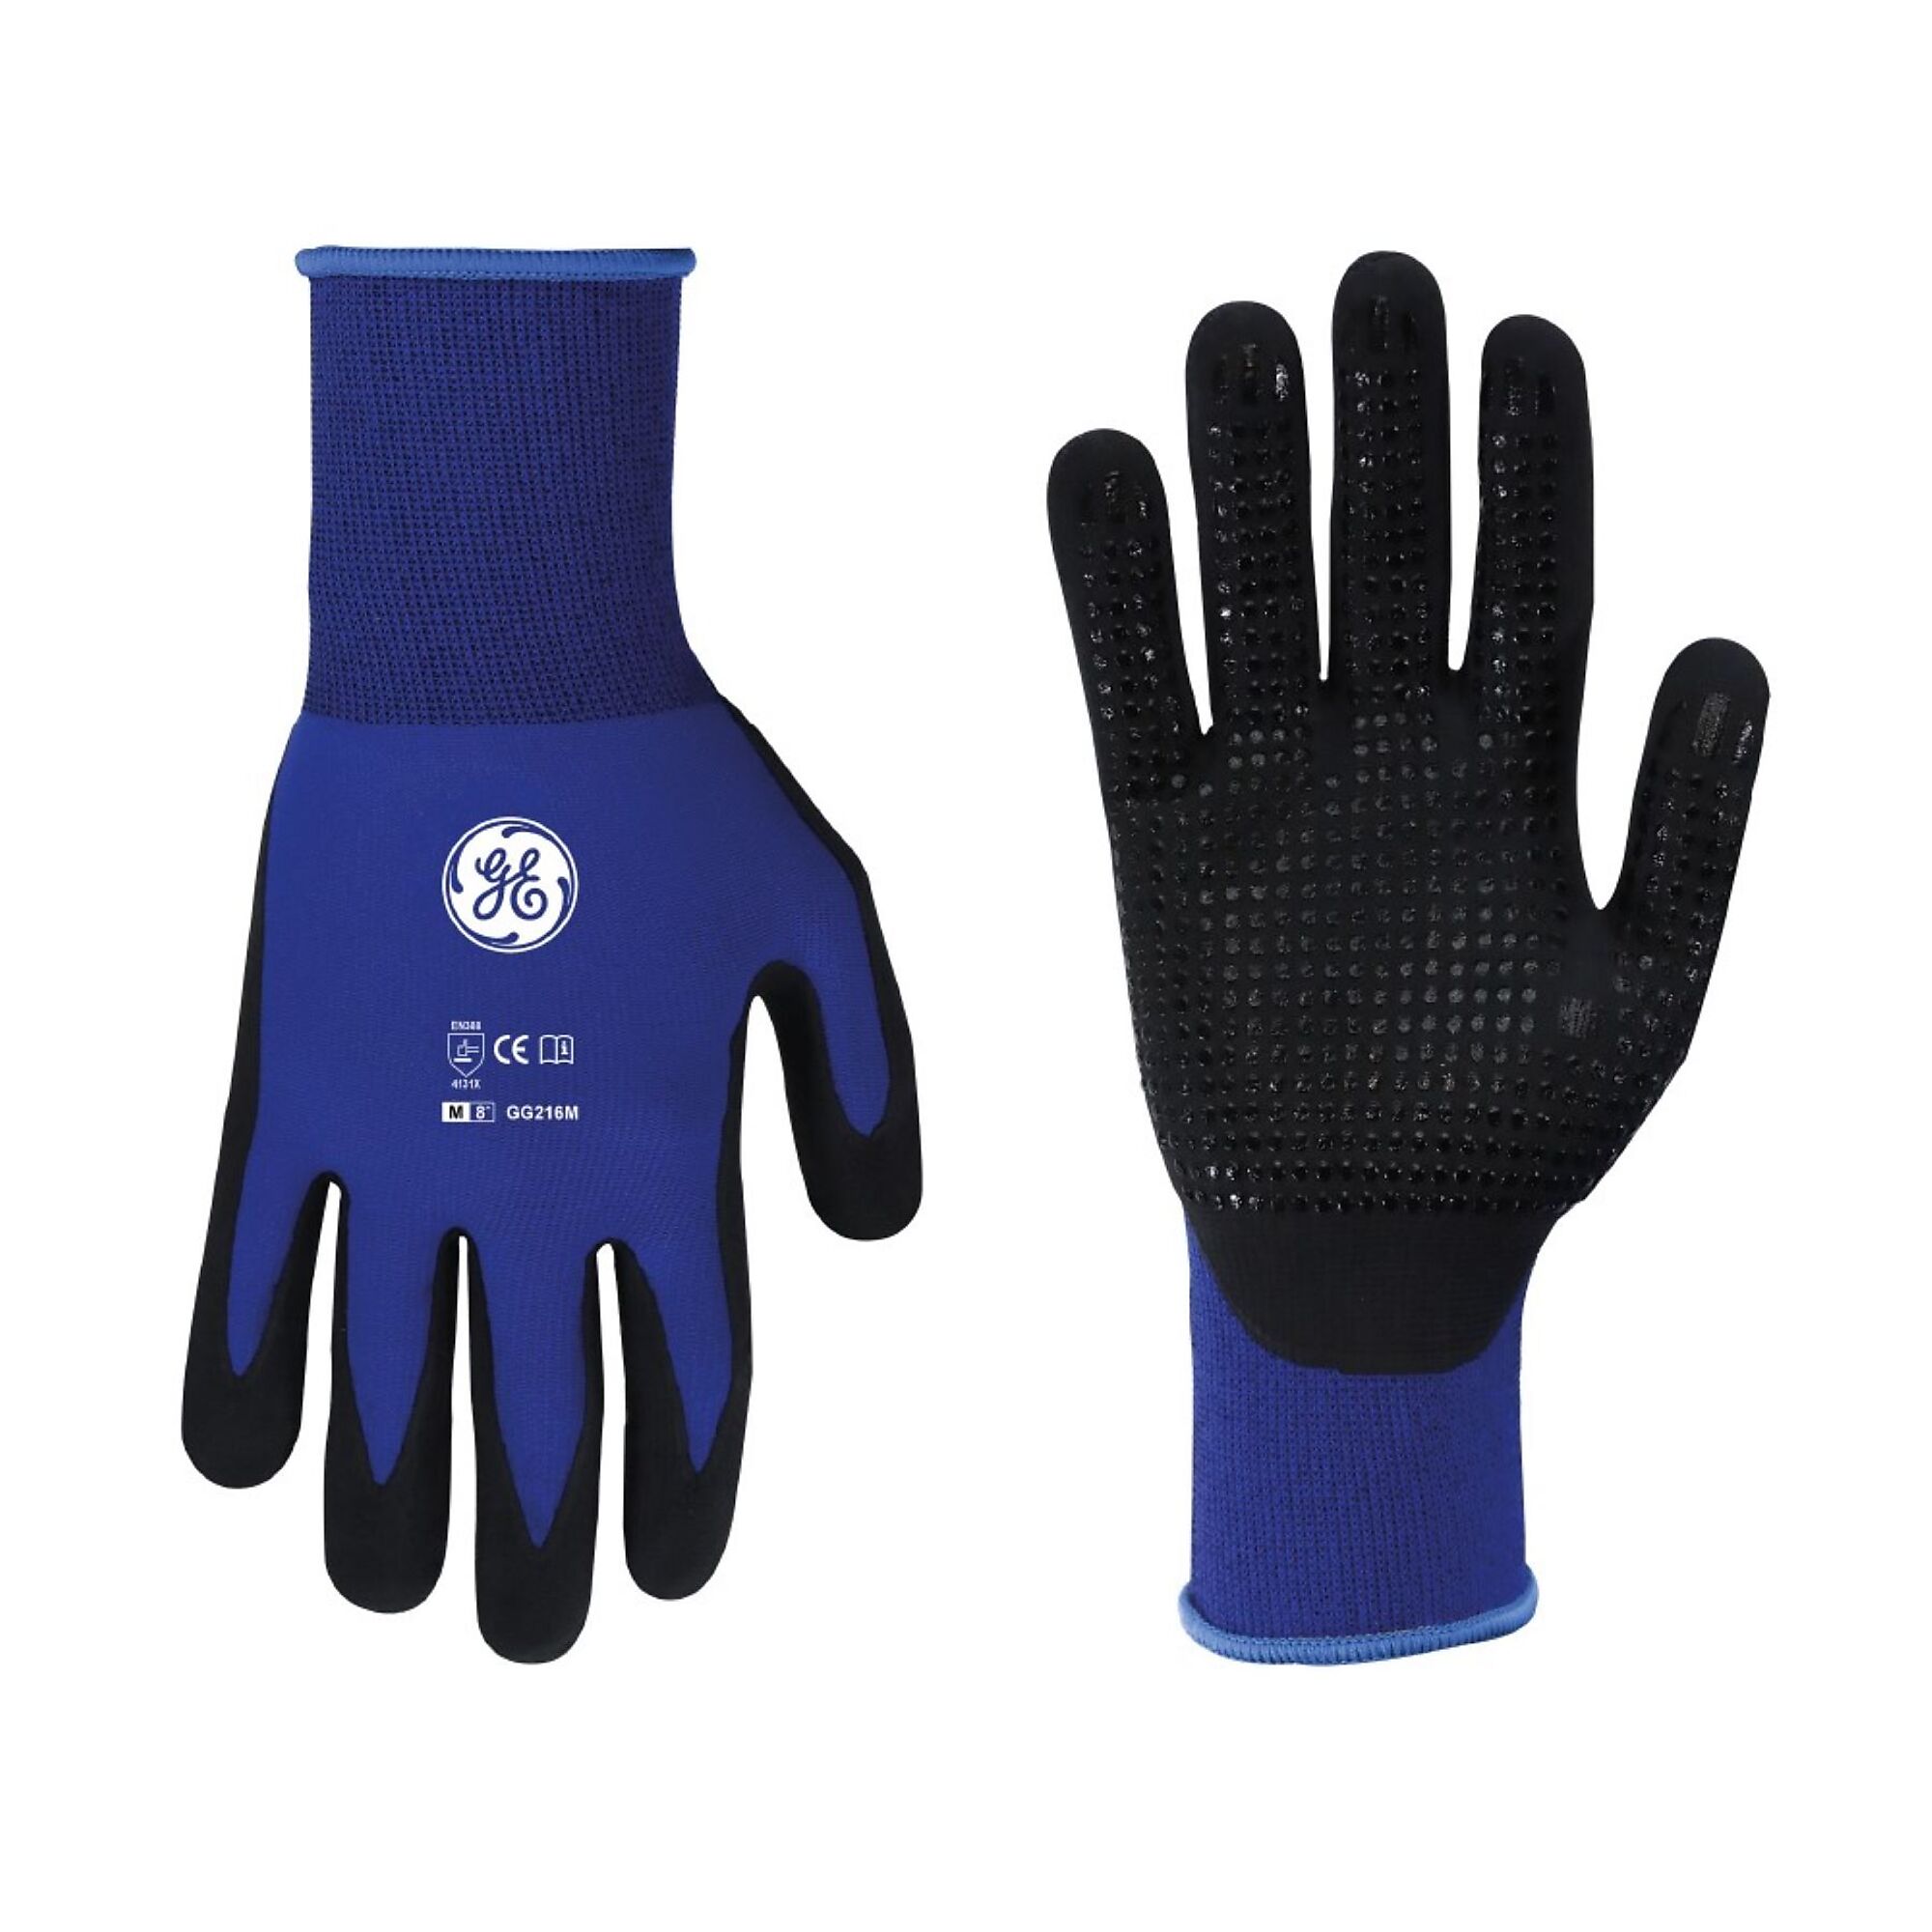 General Electric, Unisex Dipped Gloves Black/Blue M 12 pair, Size M, Included (qty.) 12, Model GG216M